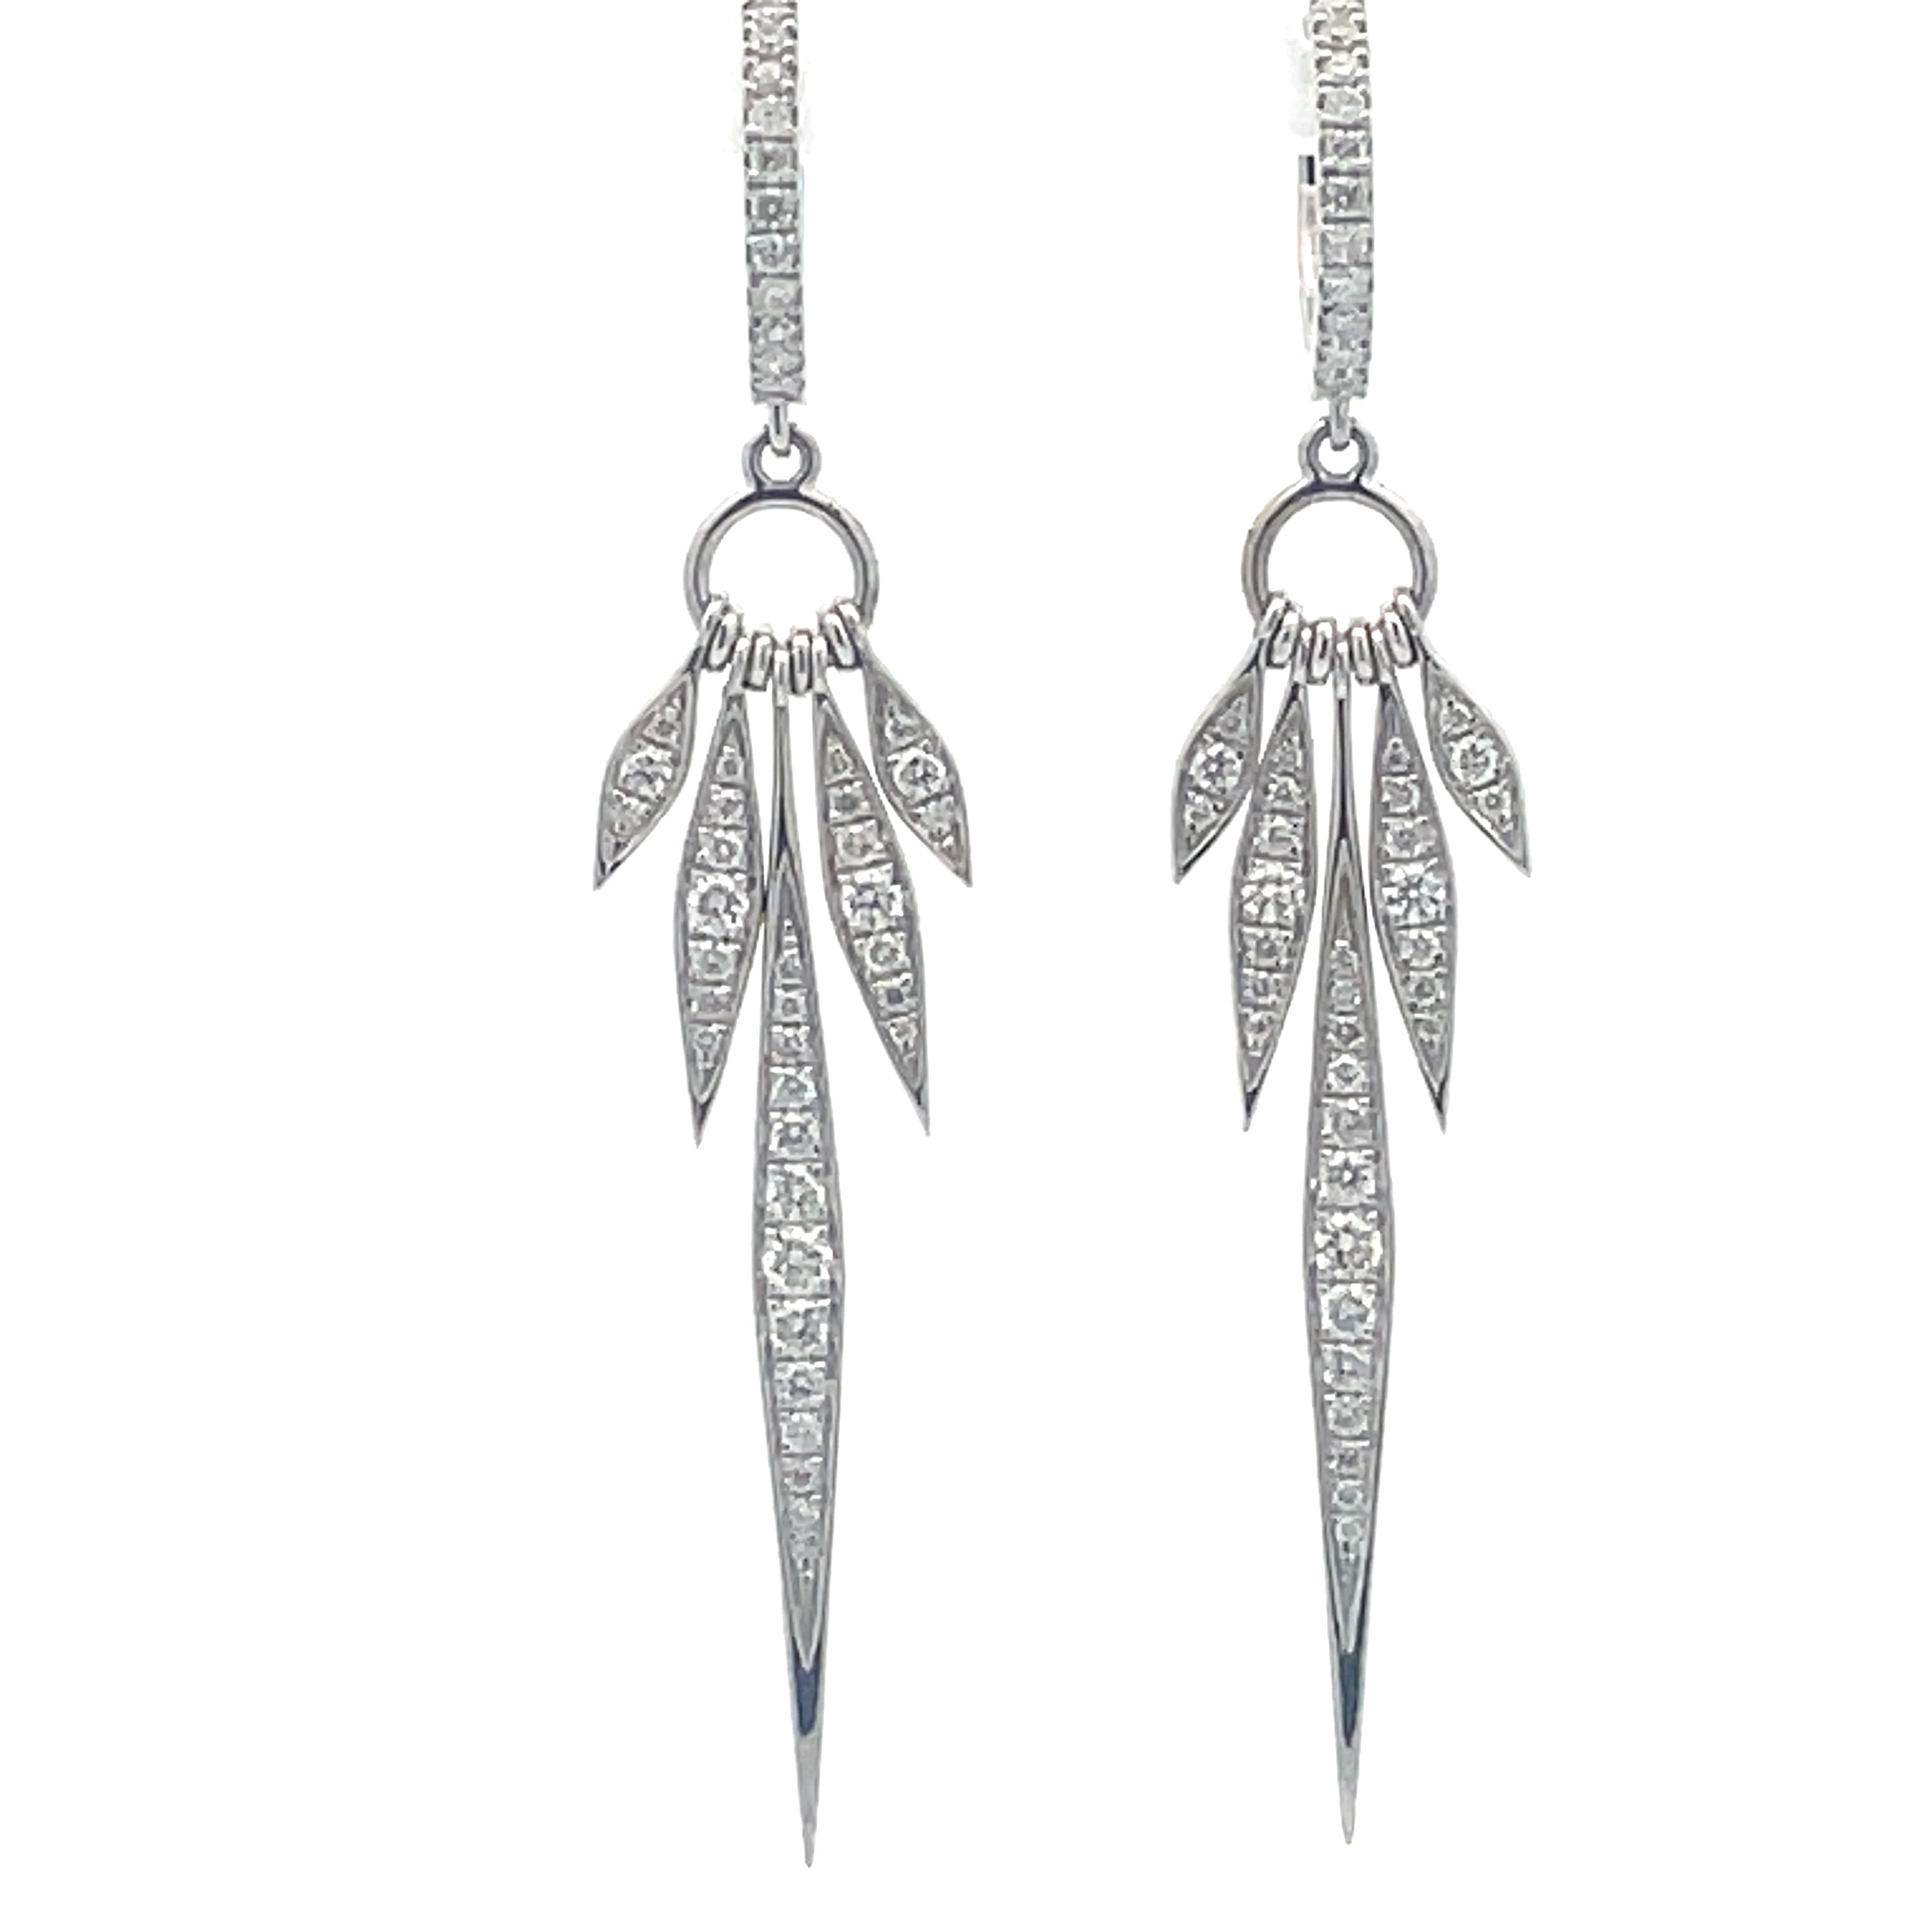 Enhance your edgy style with our Five Spike Diamond Earrings. Crafted from 18k white gold, these long earrings feature 5 multi-size spikes adorned with round diamonds totaling 0.82 cts. With an easy hinge system, these earrings provide both style and convenience. Elevate any look with these unique and stunning earrings.